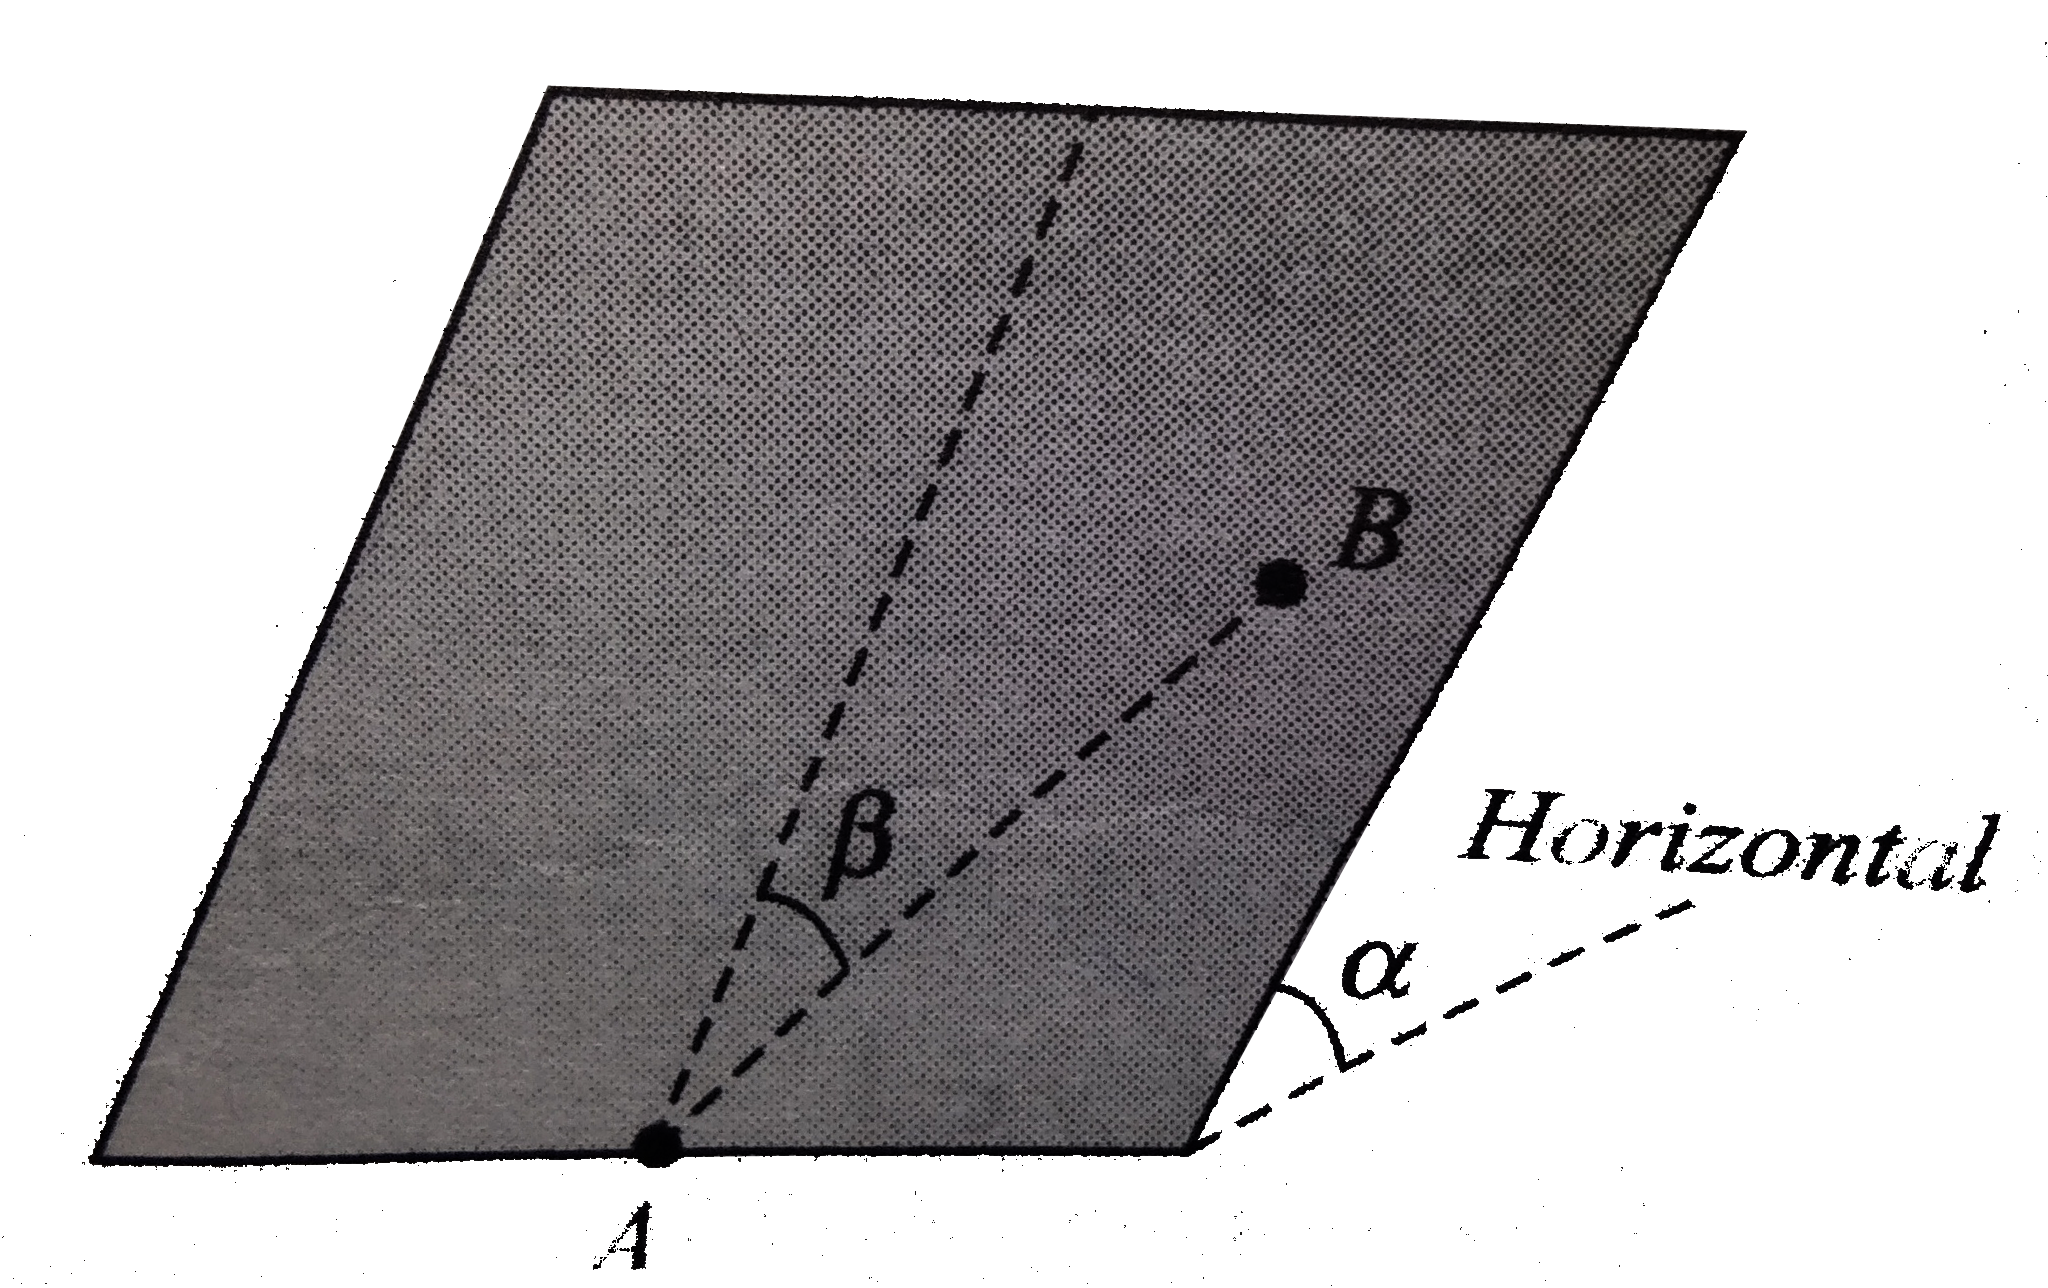 A charge particle A is fixed at the base of a uniform slope of inclination alpha. Another charge particle B is palced on the slope at an angulare position beta measured from the line of greatest slope passing through the position of the first particle. The coefficient of froction between the particle B and the slope is mu(mu lt tan alpha) .For the particle at B to stay in equilibrium what would be the maximum value of the angle beta ?